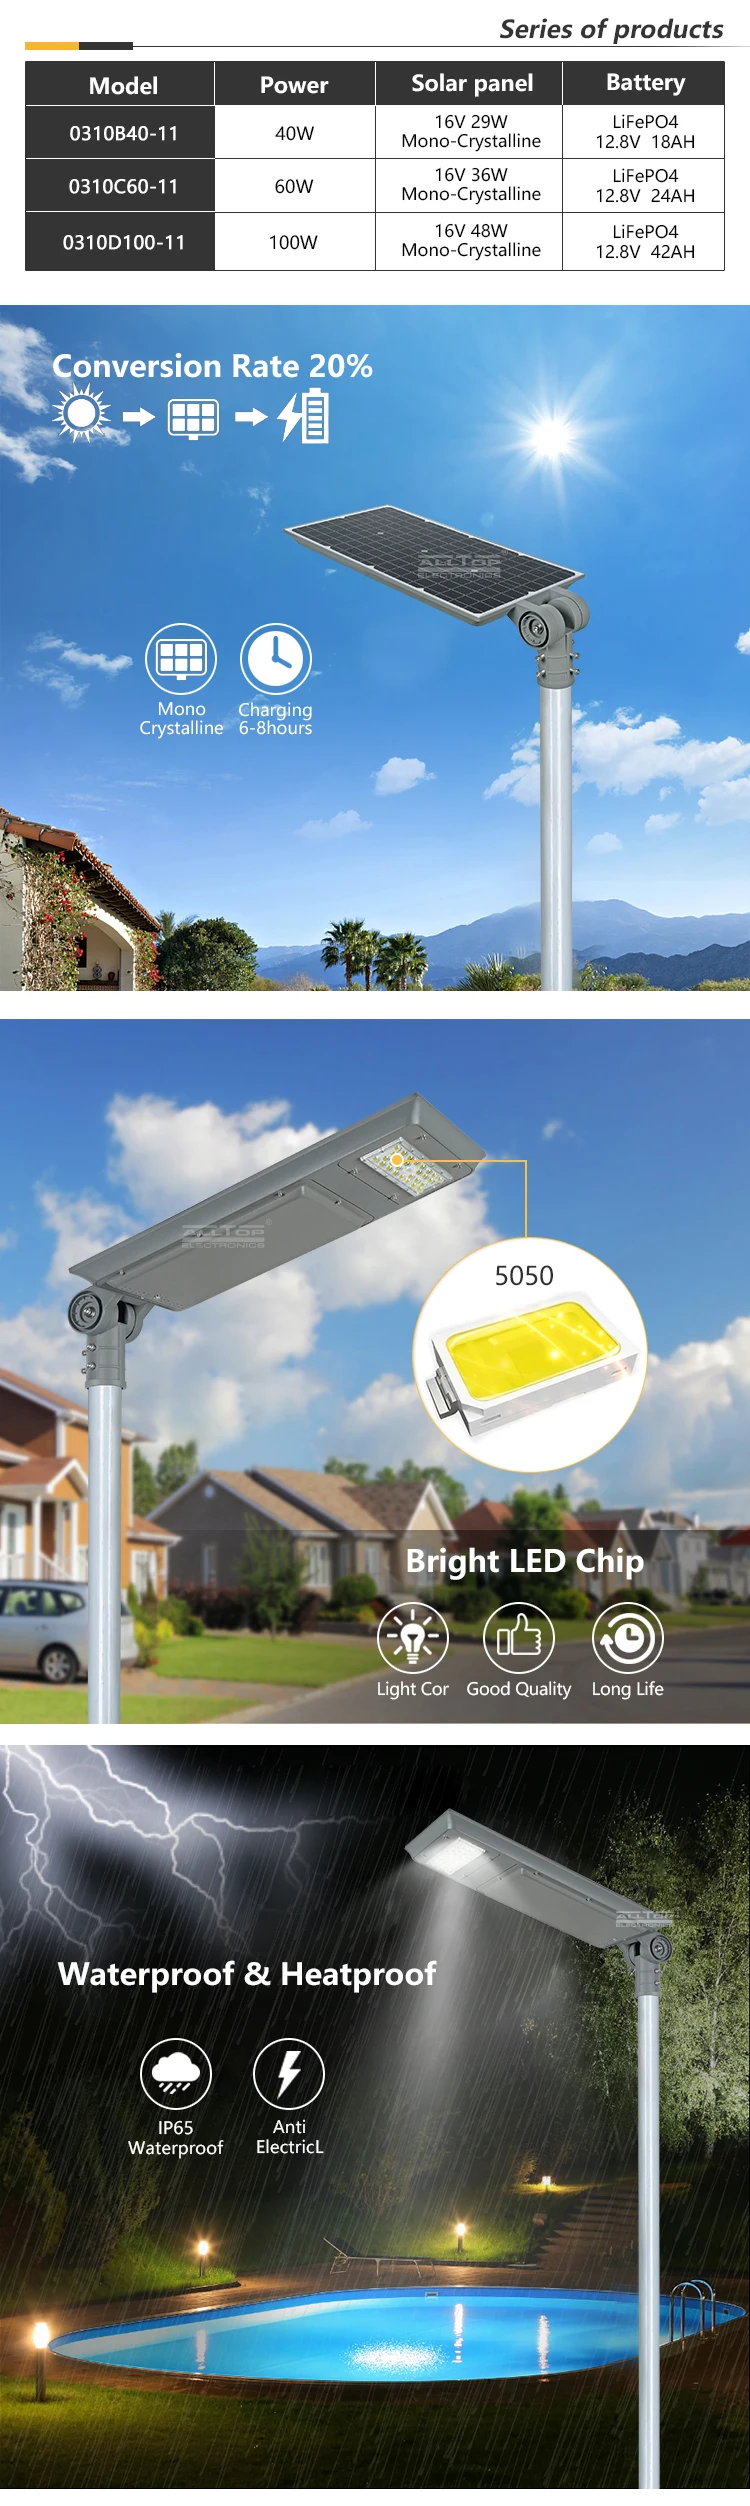 ALLTOP High lumen IP65 outdoor mounted smd 40w 60w100w integrated all in one solar led street light